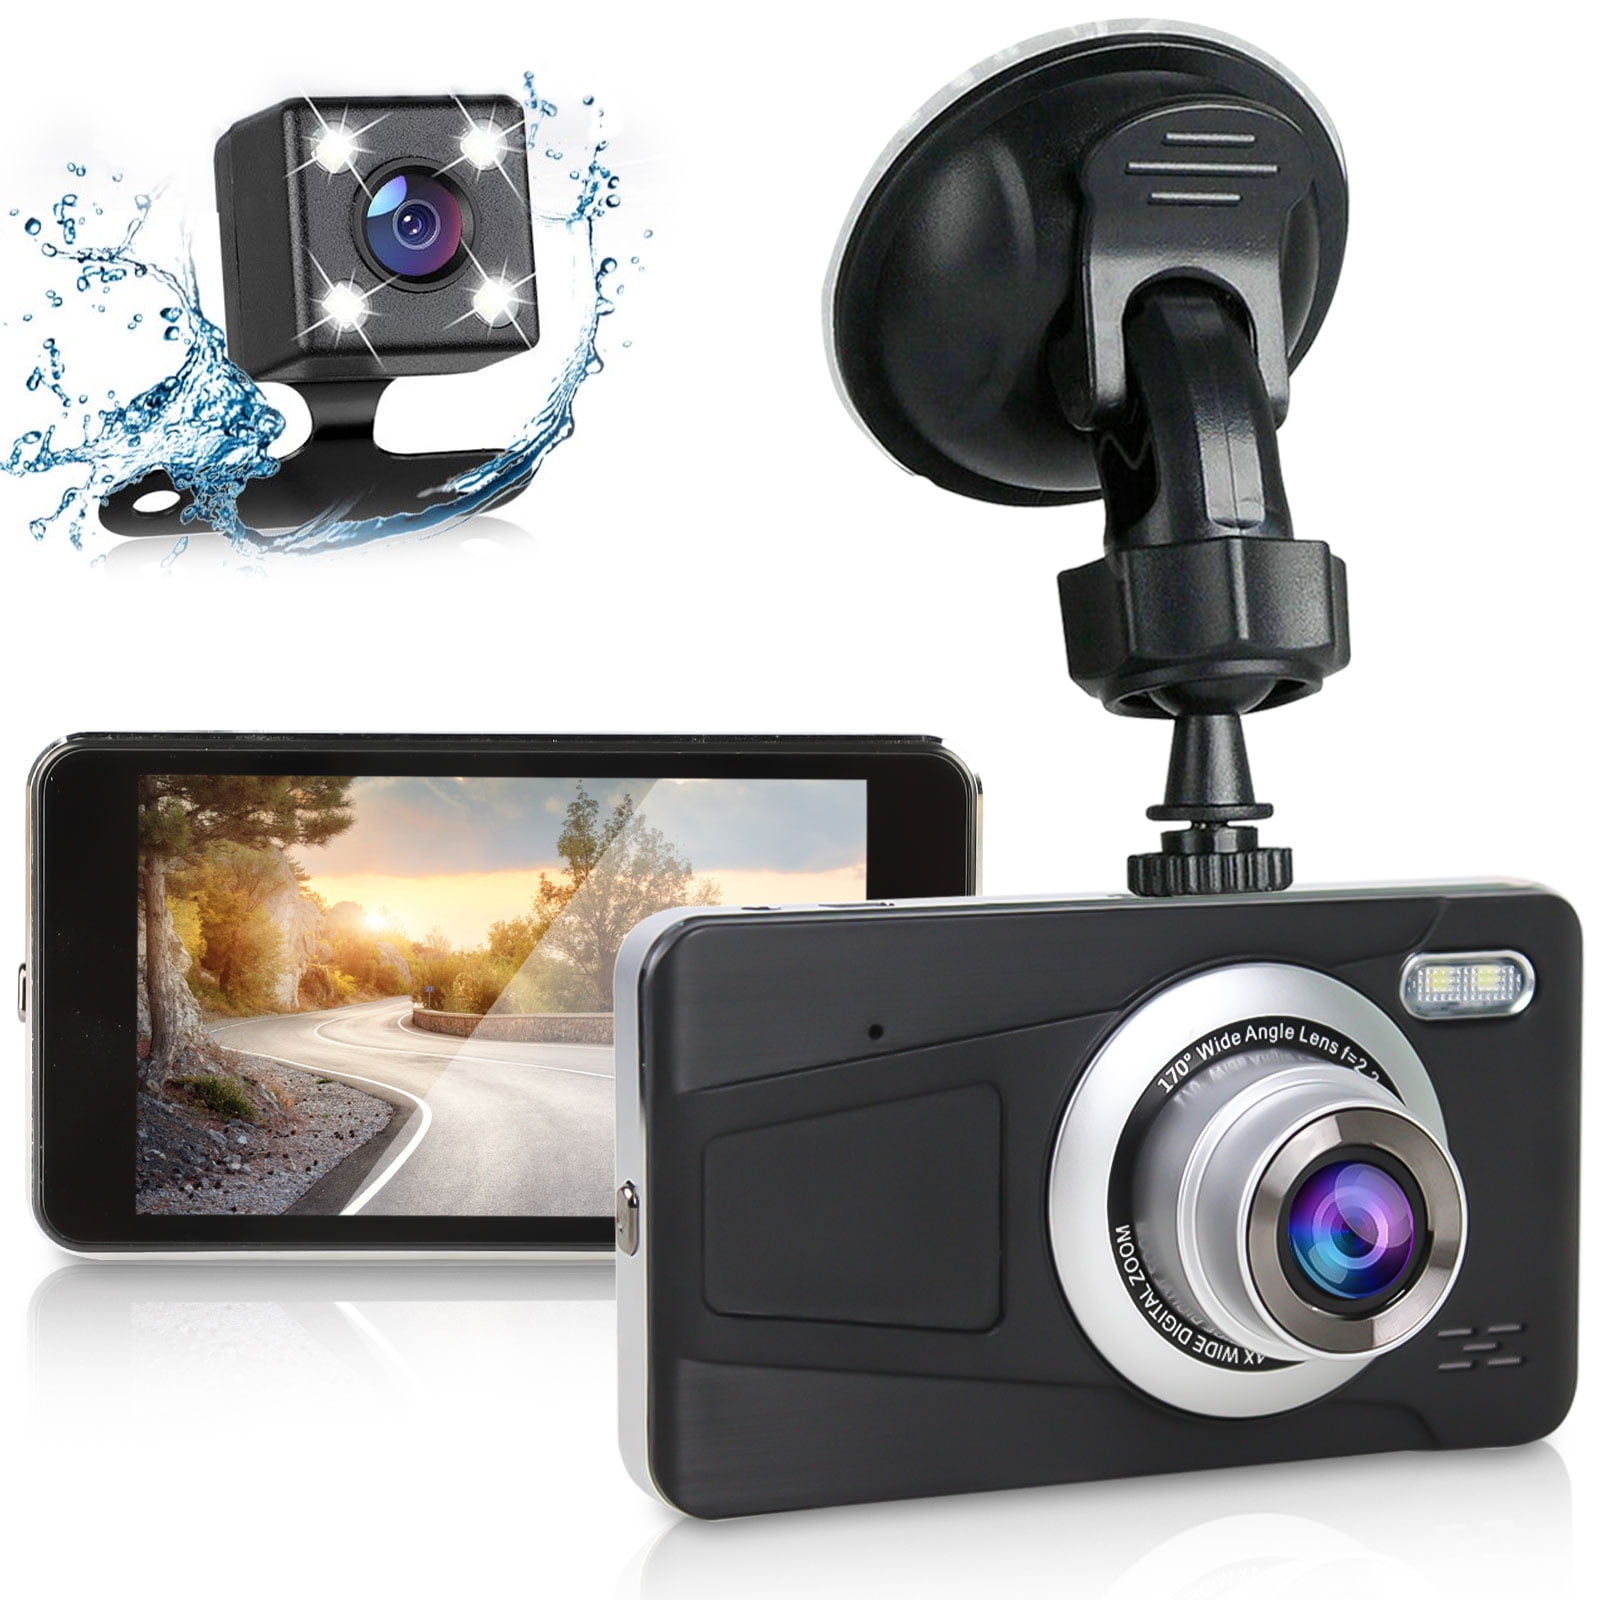 9.66 Dual 1080P IPS Full Touch Screen Waterproof Front and Rear Cameras Feanor Car Dash Mirror Camera Parking Assistance&Monitor Night Vision,170°Viewing Angle Split Screen Display 32GB TF Card 